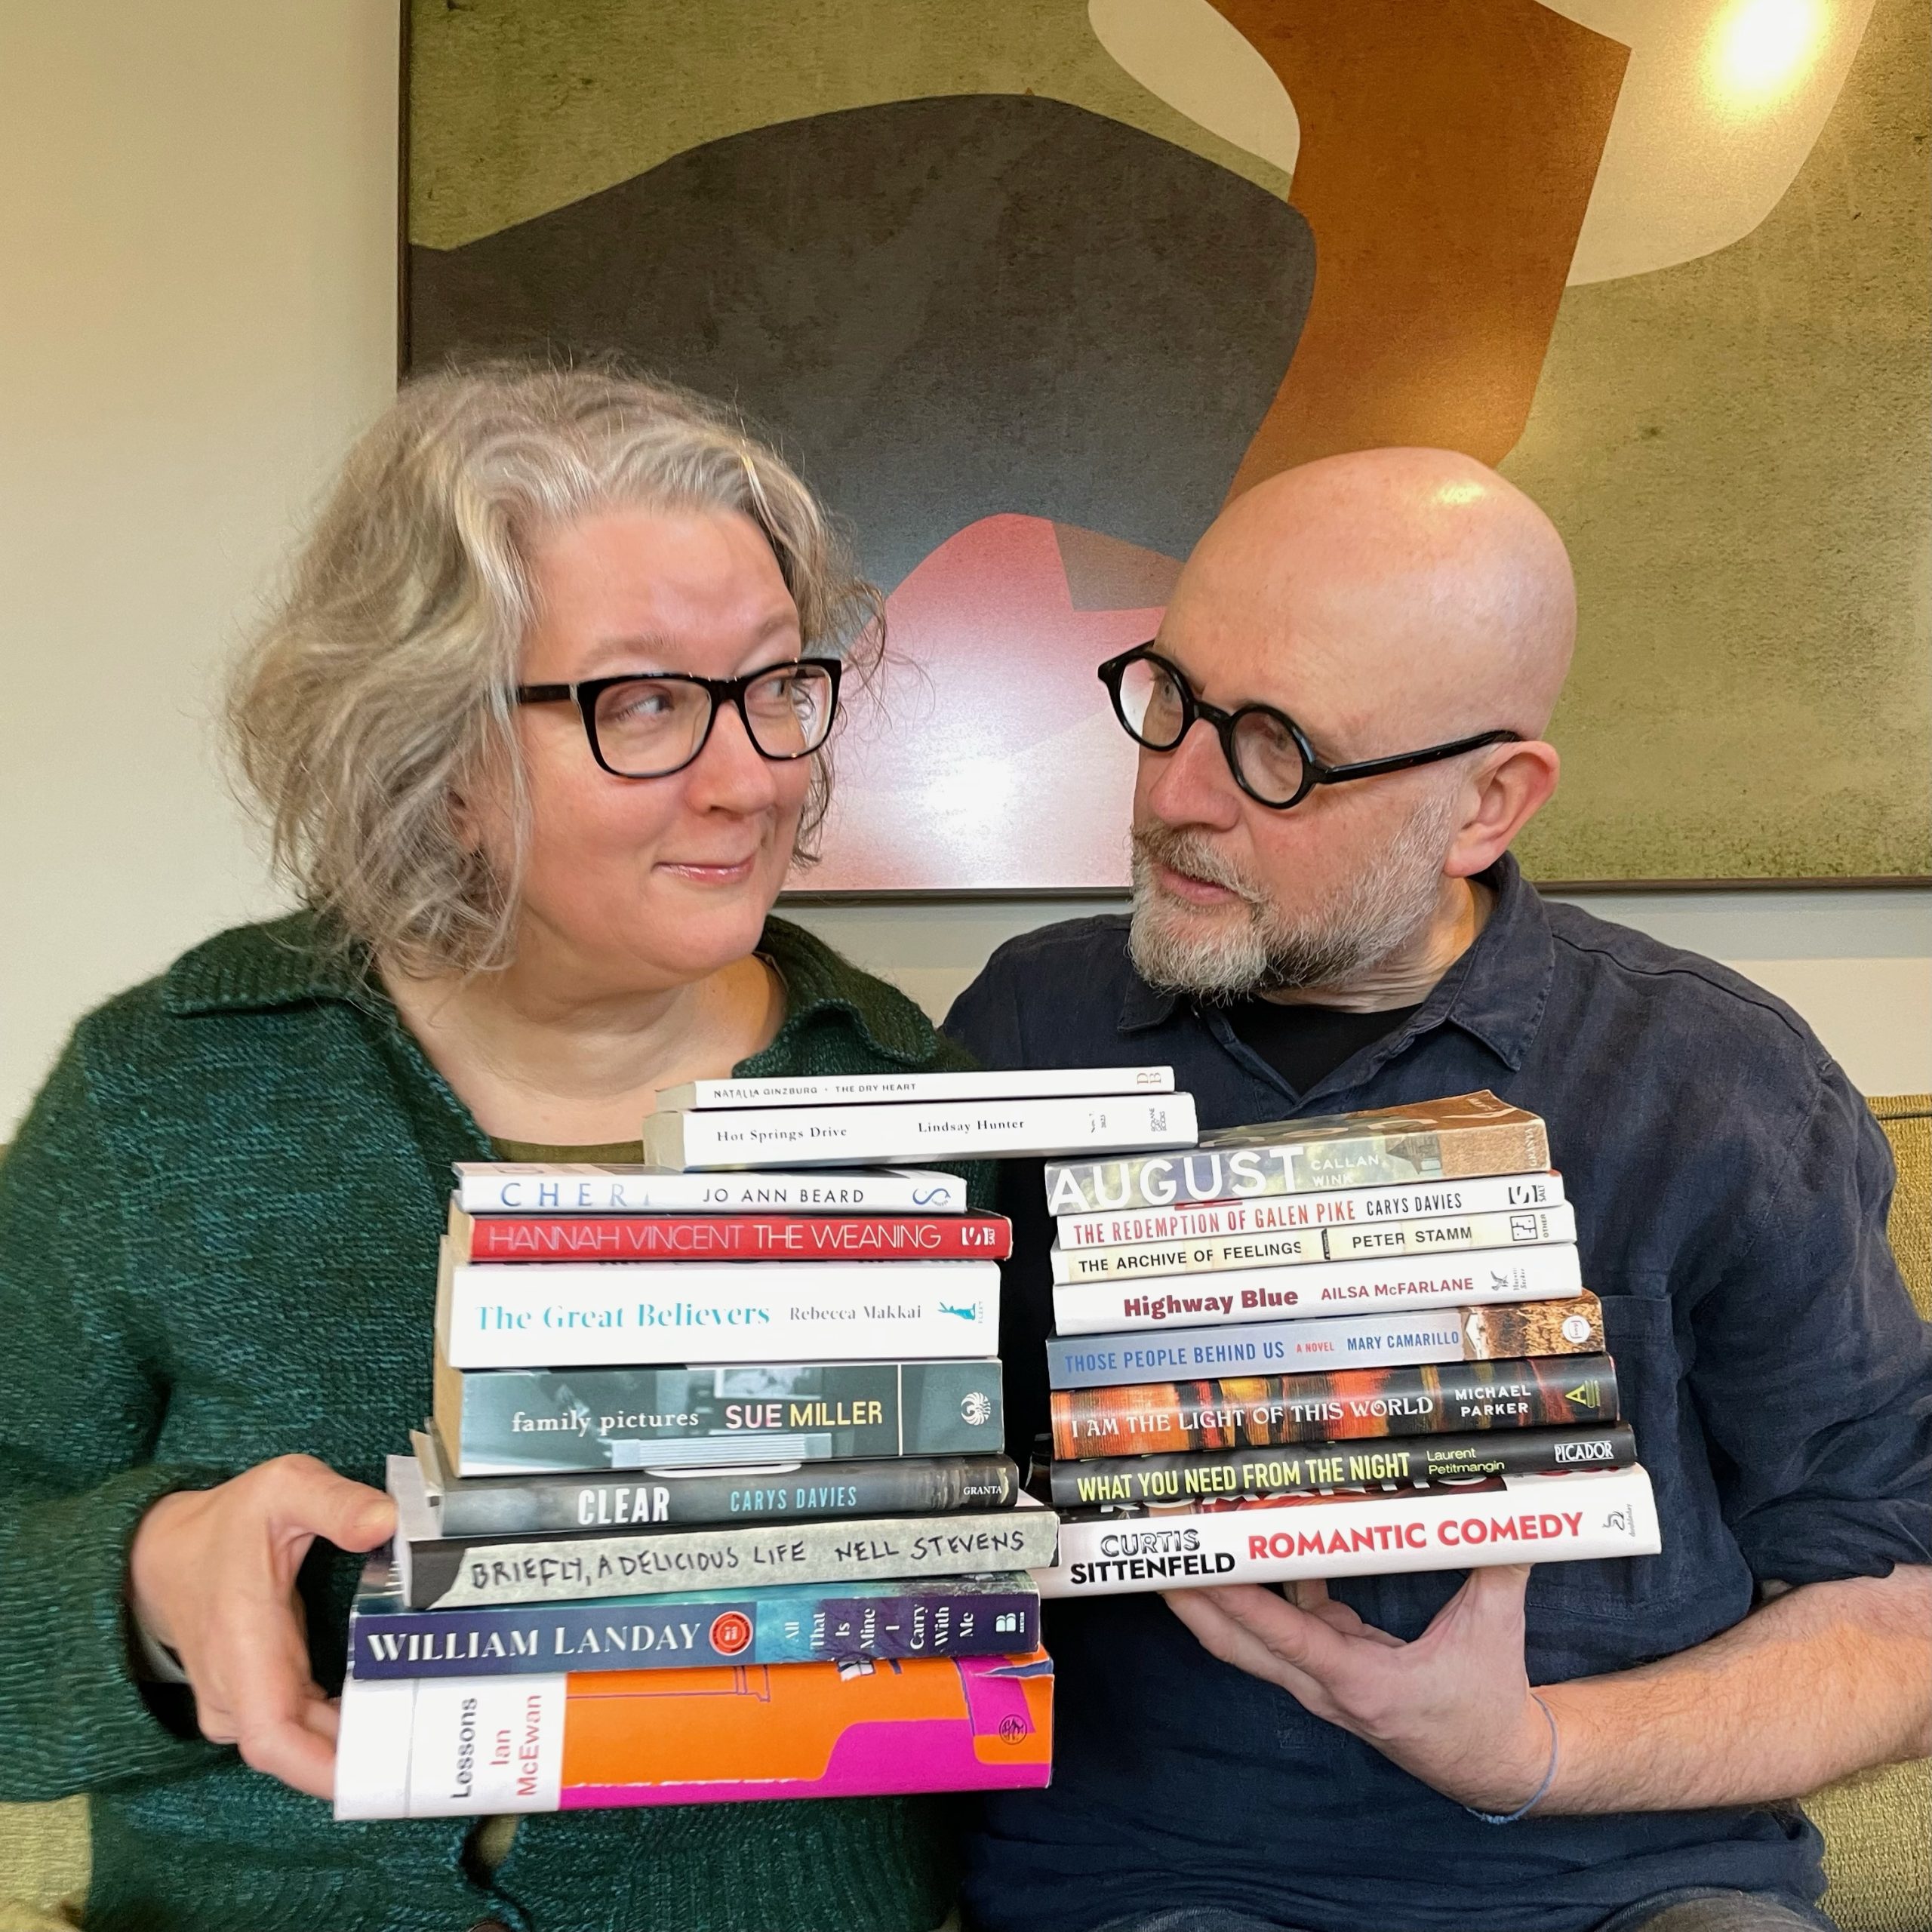 Man and Woman wearing glasses and holding stacks of books